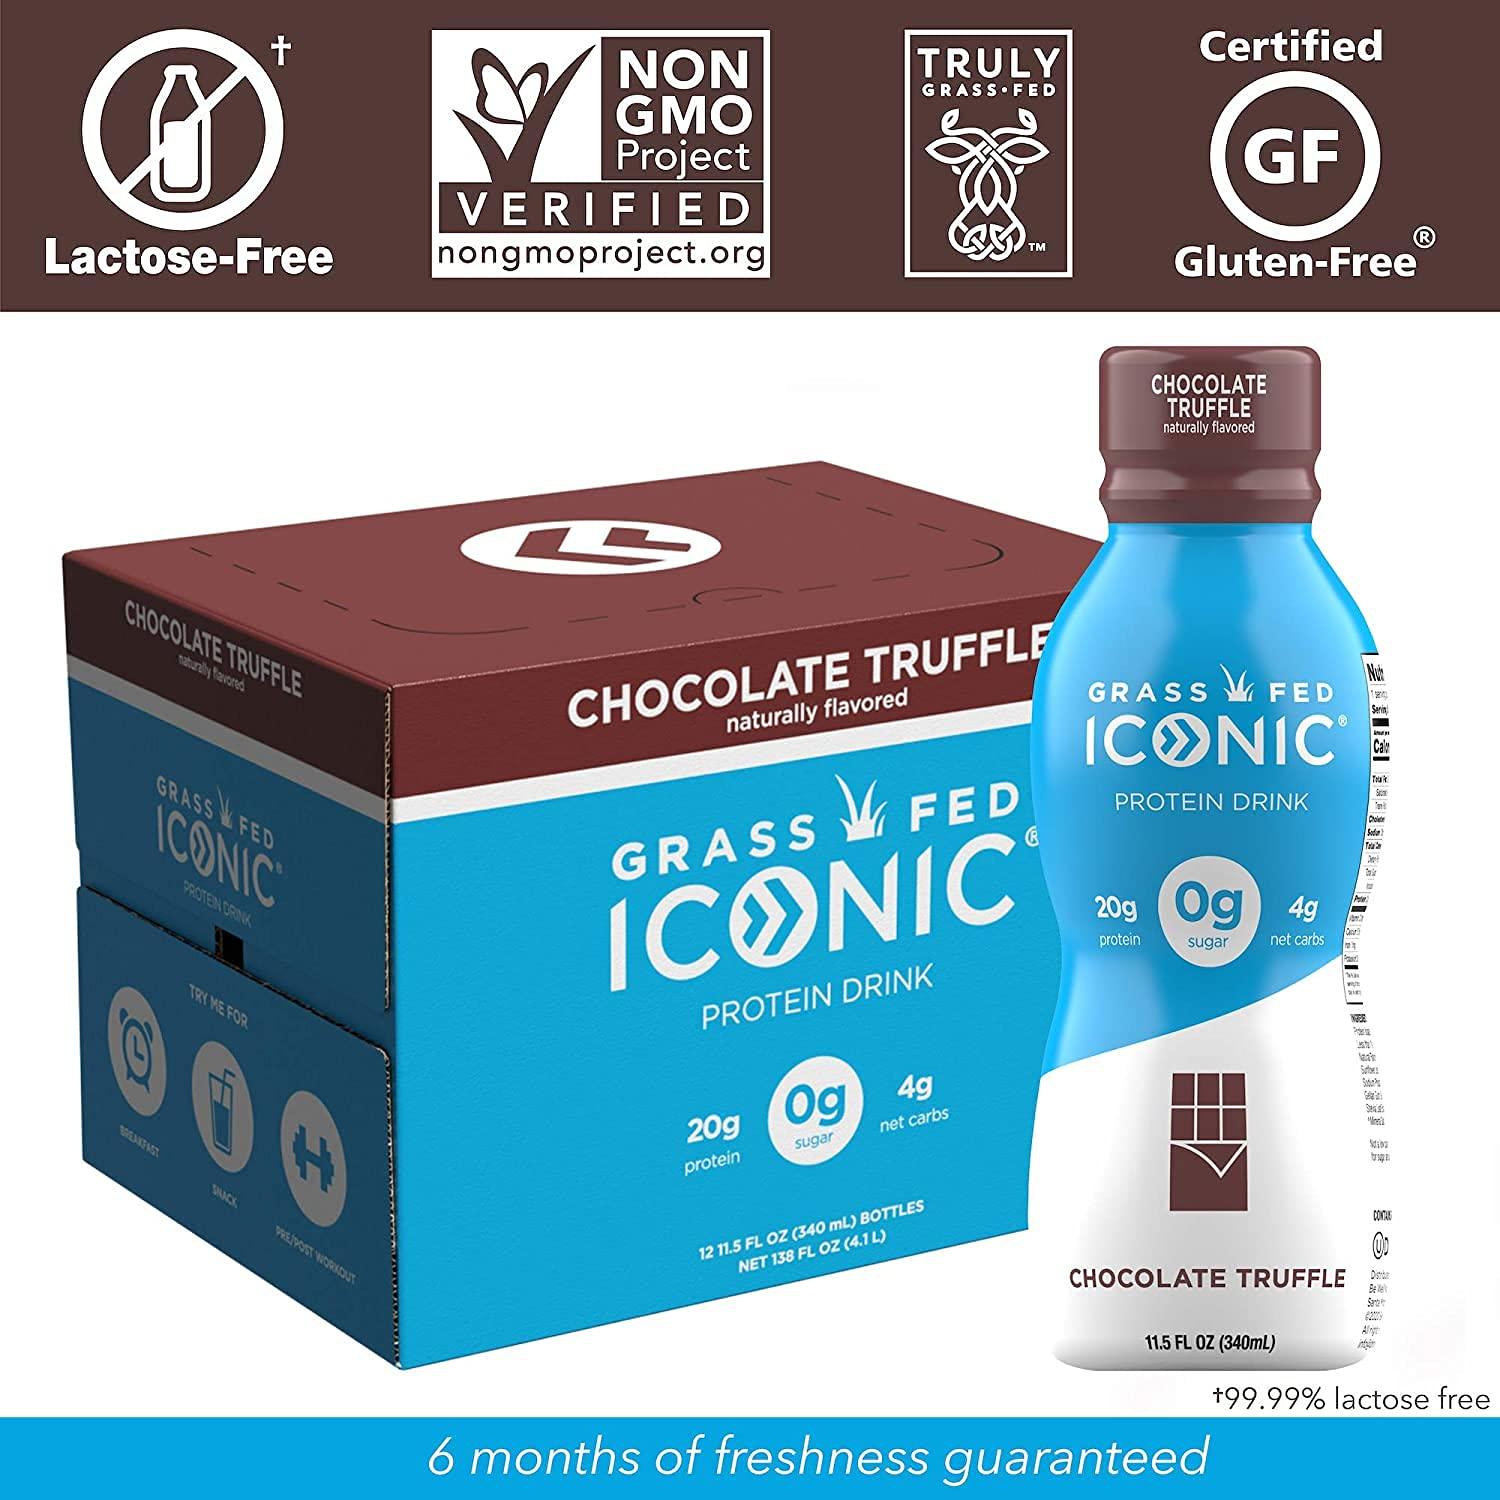 Iconic Protein Drinks, Vanilla Bean (12 Pack) - Sugar Free & Low Carb - 20g  Grass Fed Protein - Lactose Free, Gluten Free, Non-GMO, Kosher - Keto